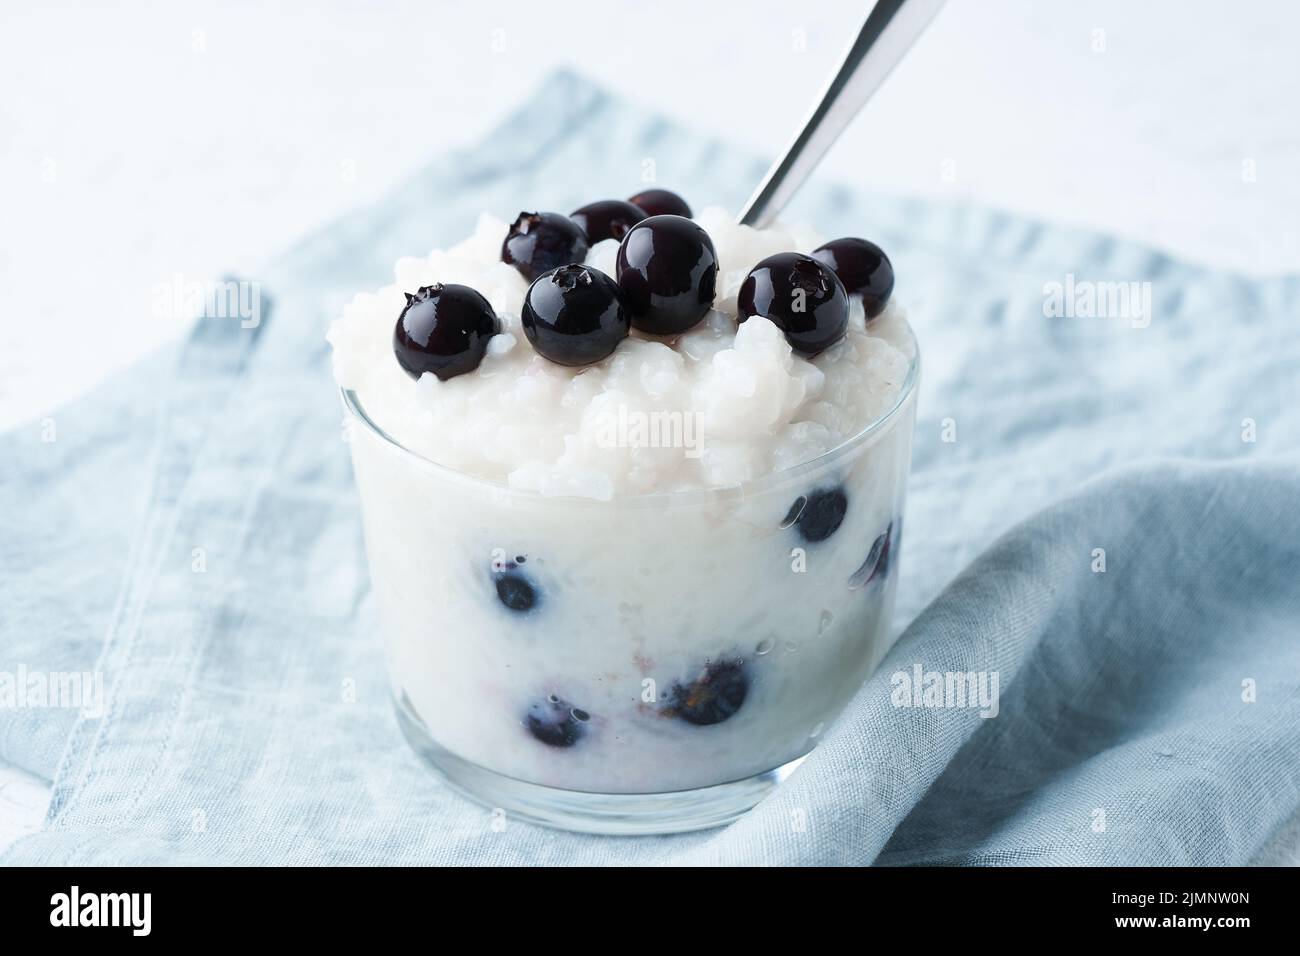 Vegan Coconut Rice Pudding with blueberry, gluten free dessert, side view. Stock Photo